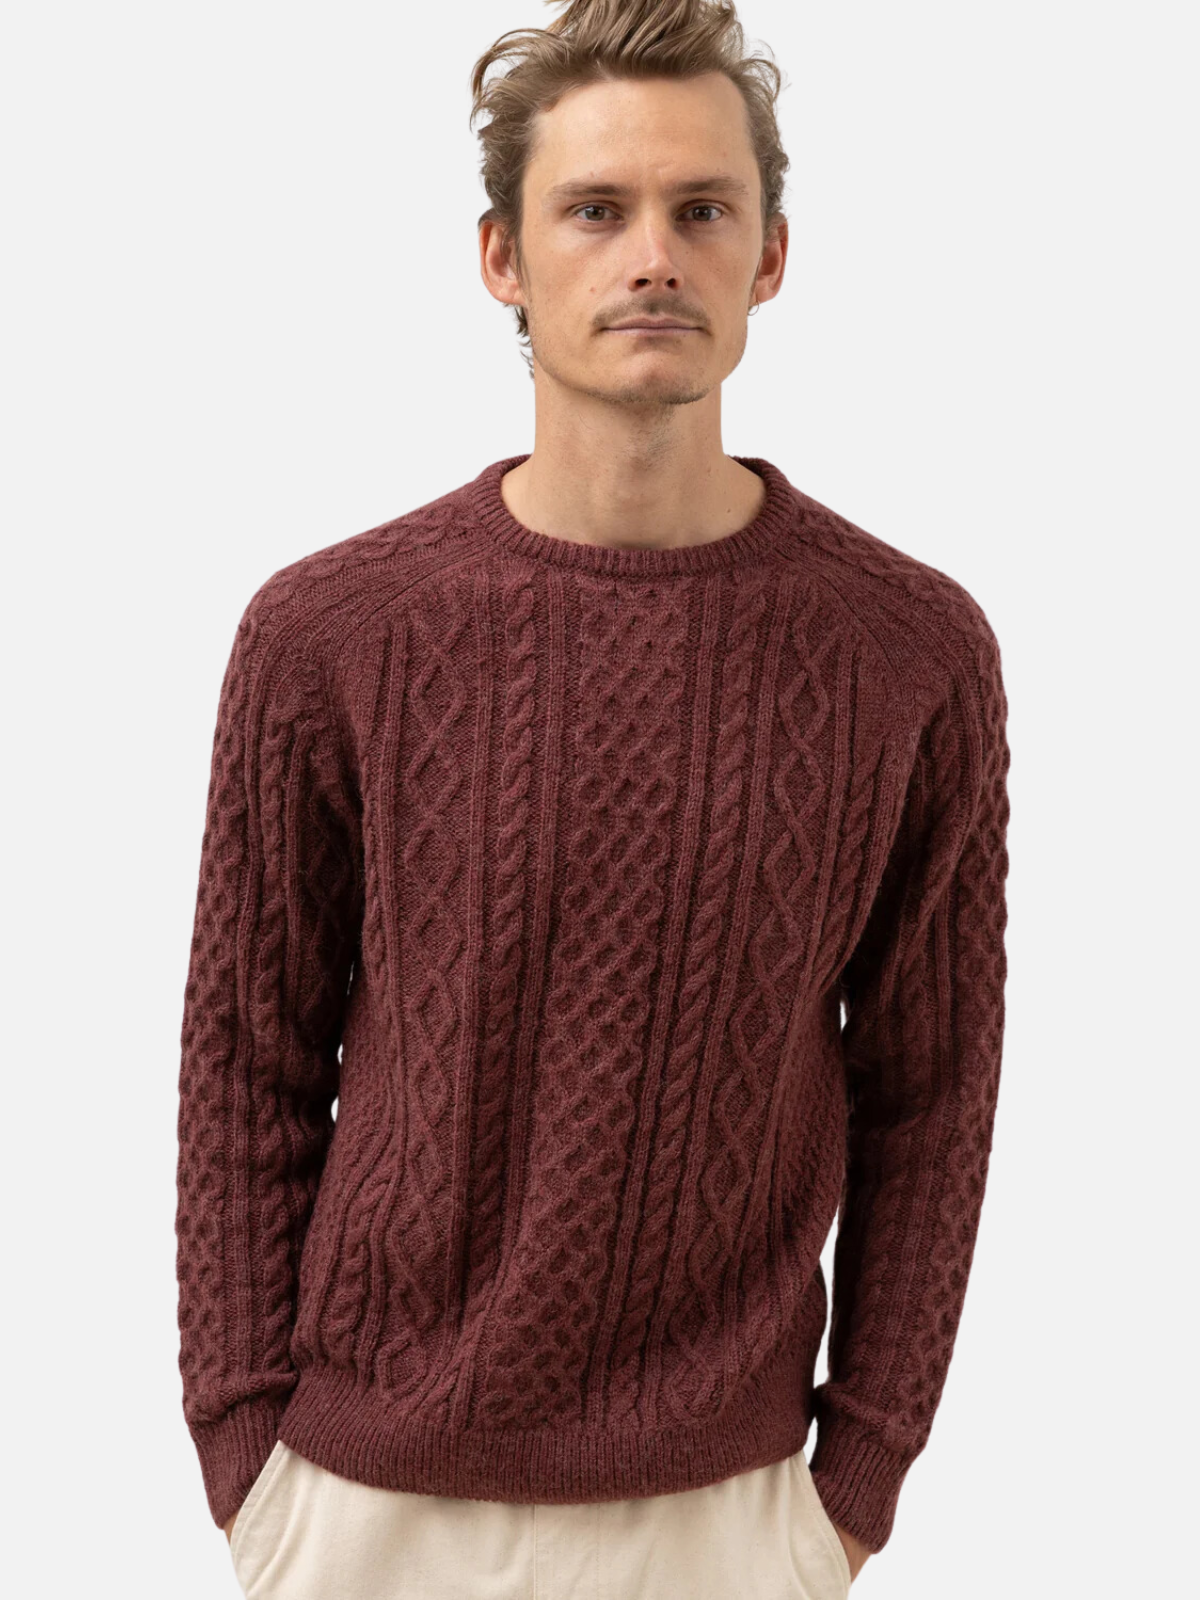 rhythm mohair fisherman cable knit sweater red maroon burgundy mulberry acrylic nylon wool kempt athens ga georgia men's clothing store